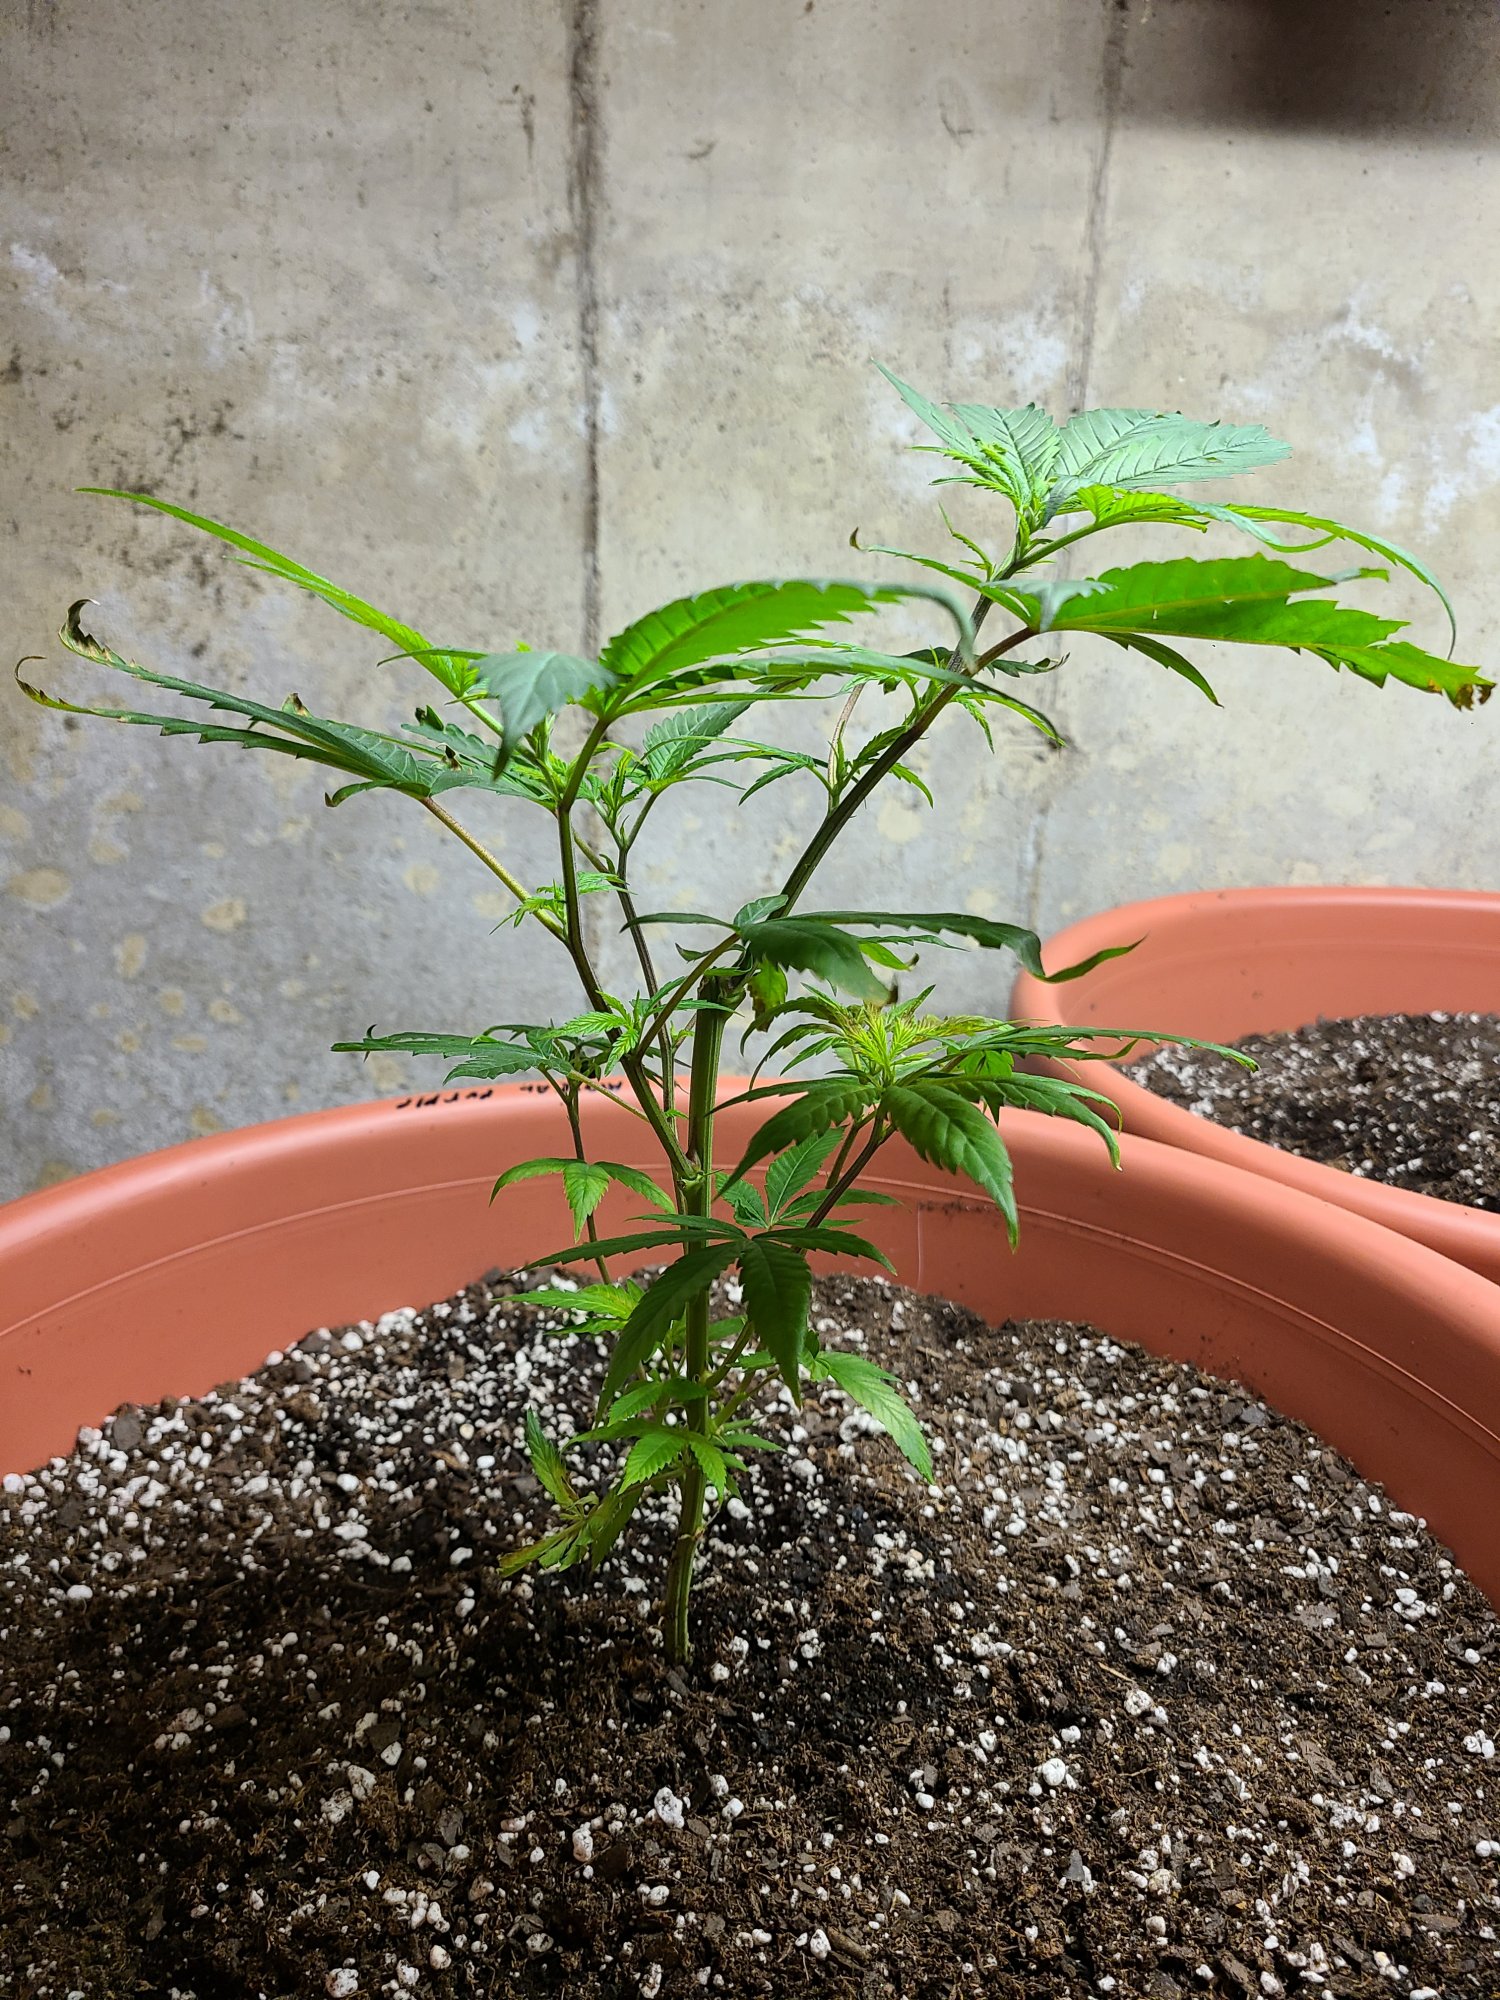 Need some advice on topping